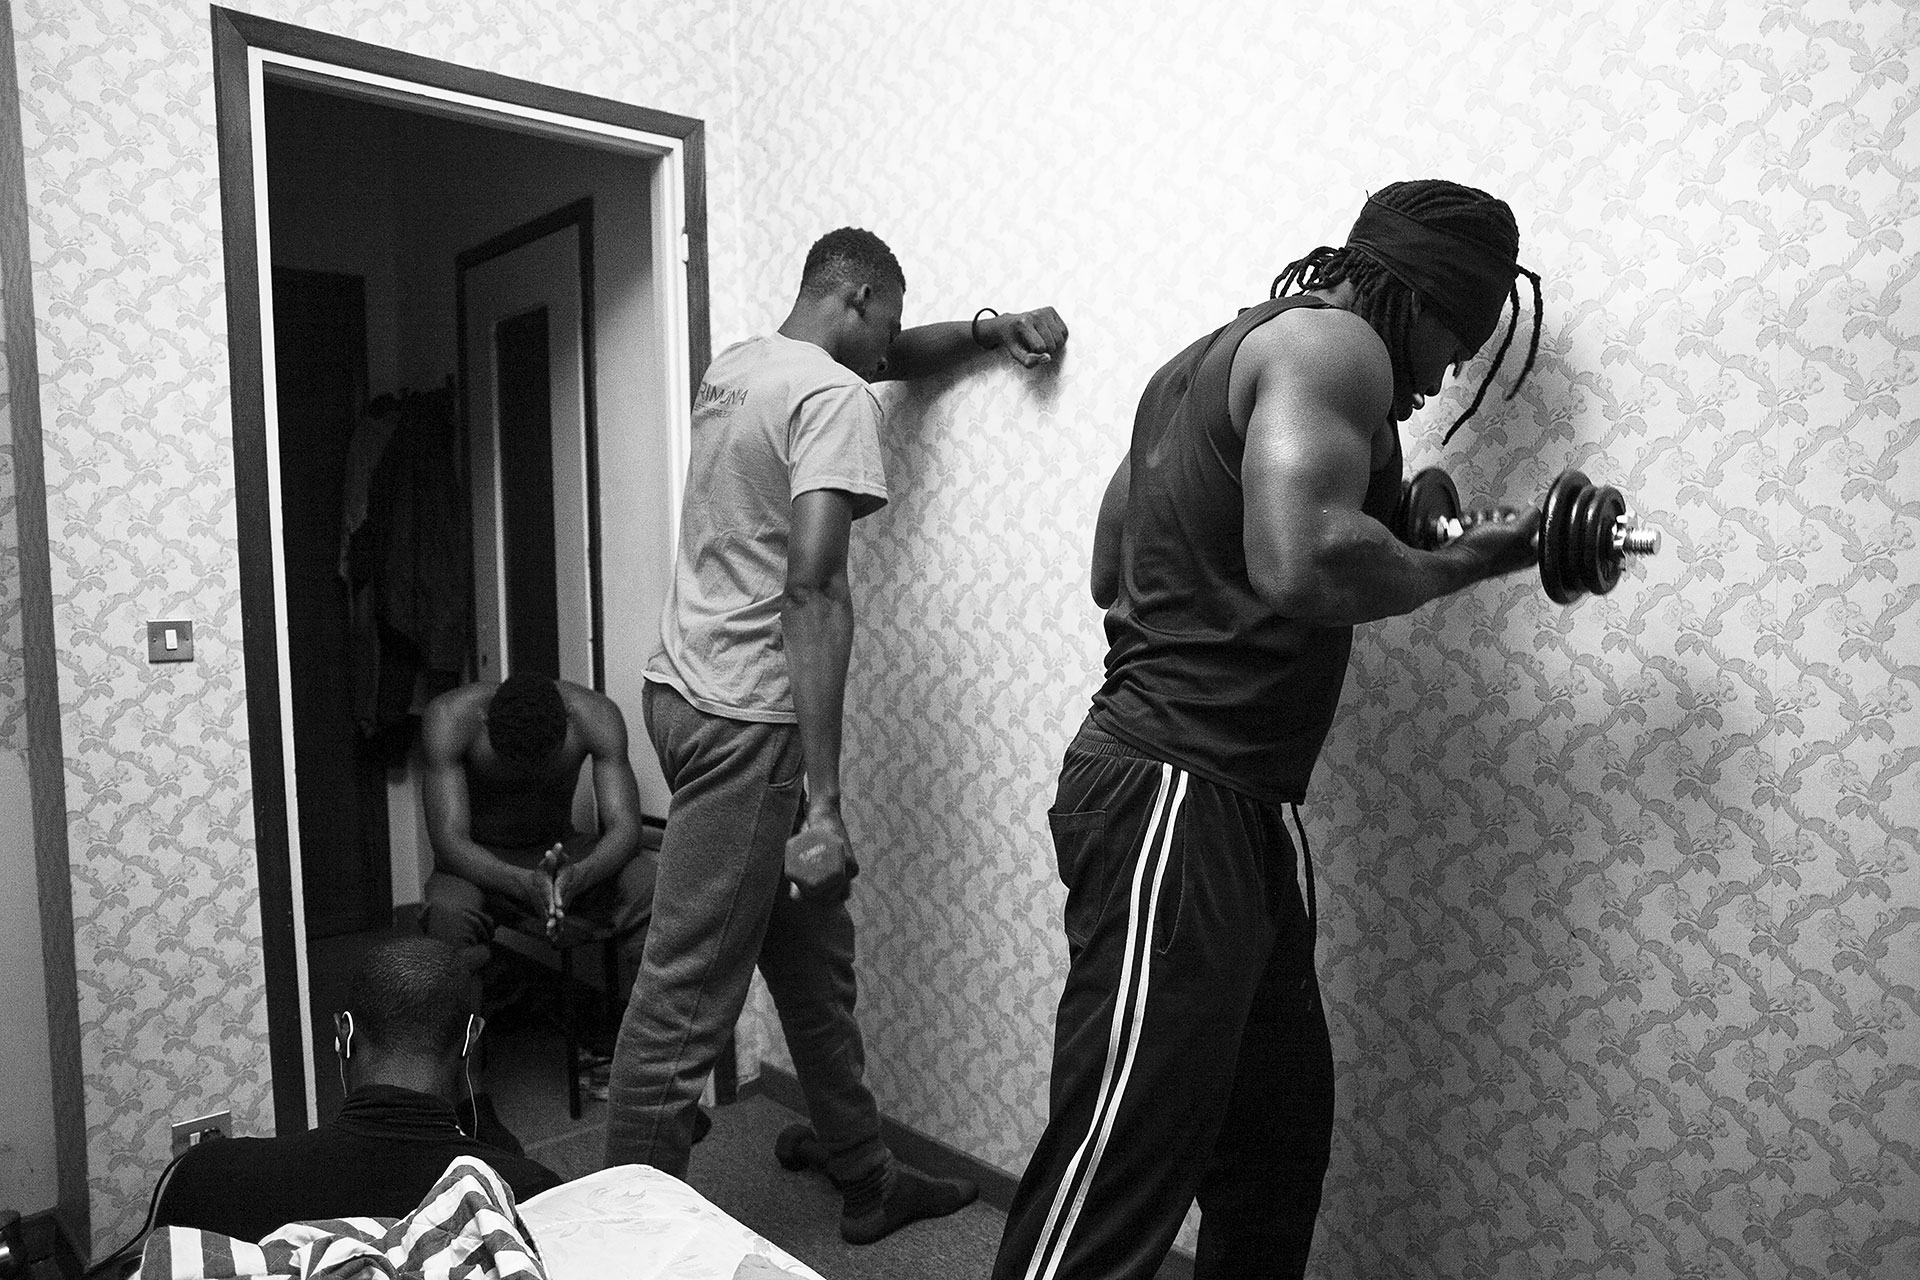 Malick and his friends Moussa, from Côte d’Ivoire and Mohammad from Senegal working out before going to bed as they do every night, not only to keep fit, but also to clear their minds and help them to sleep better.